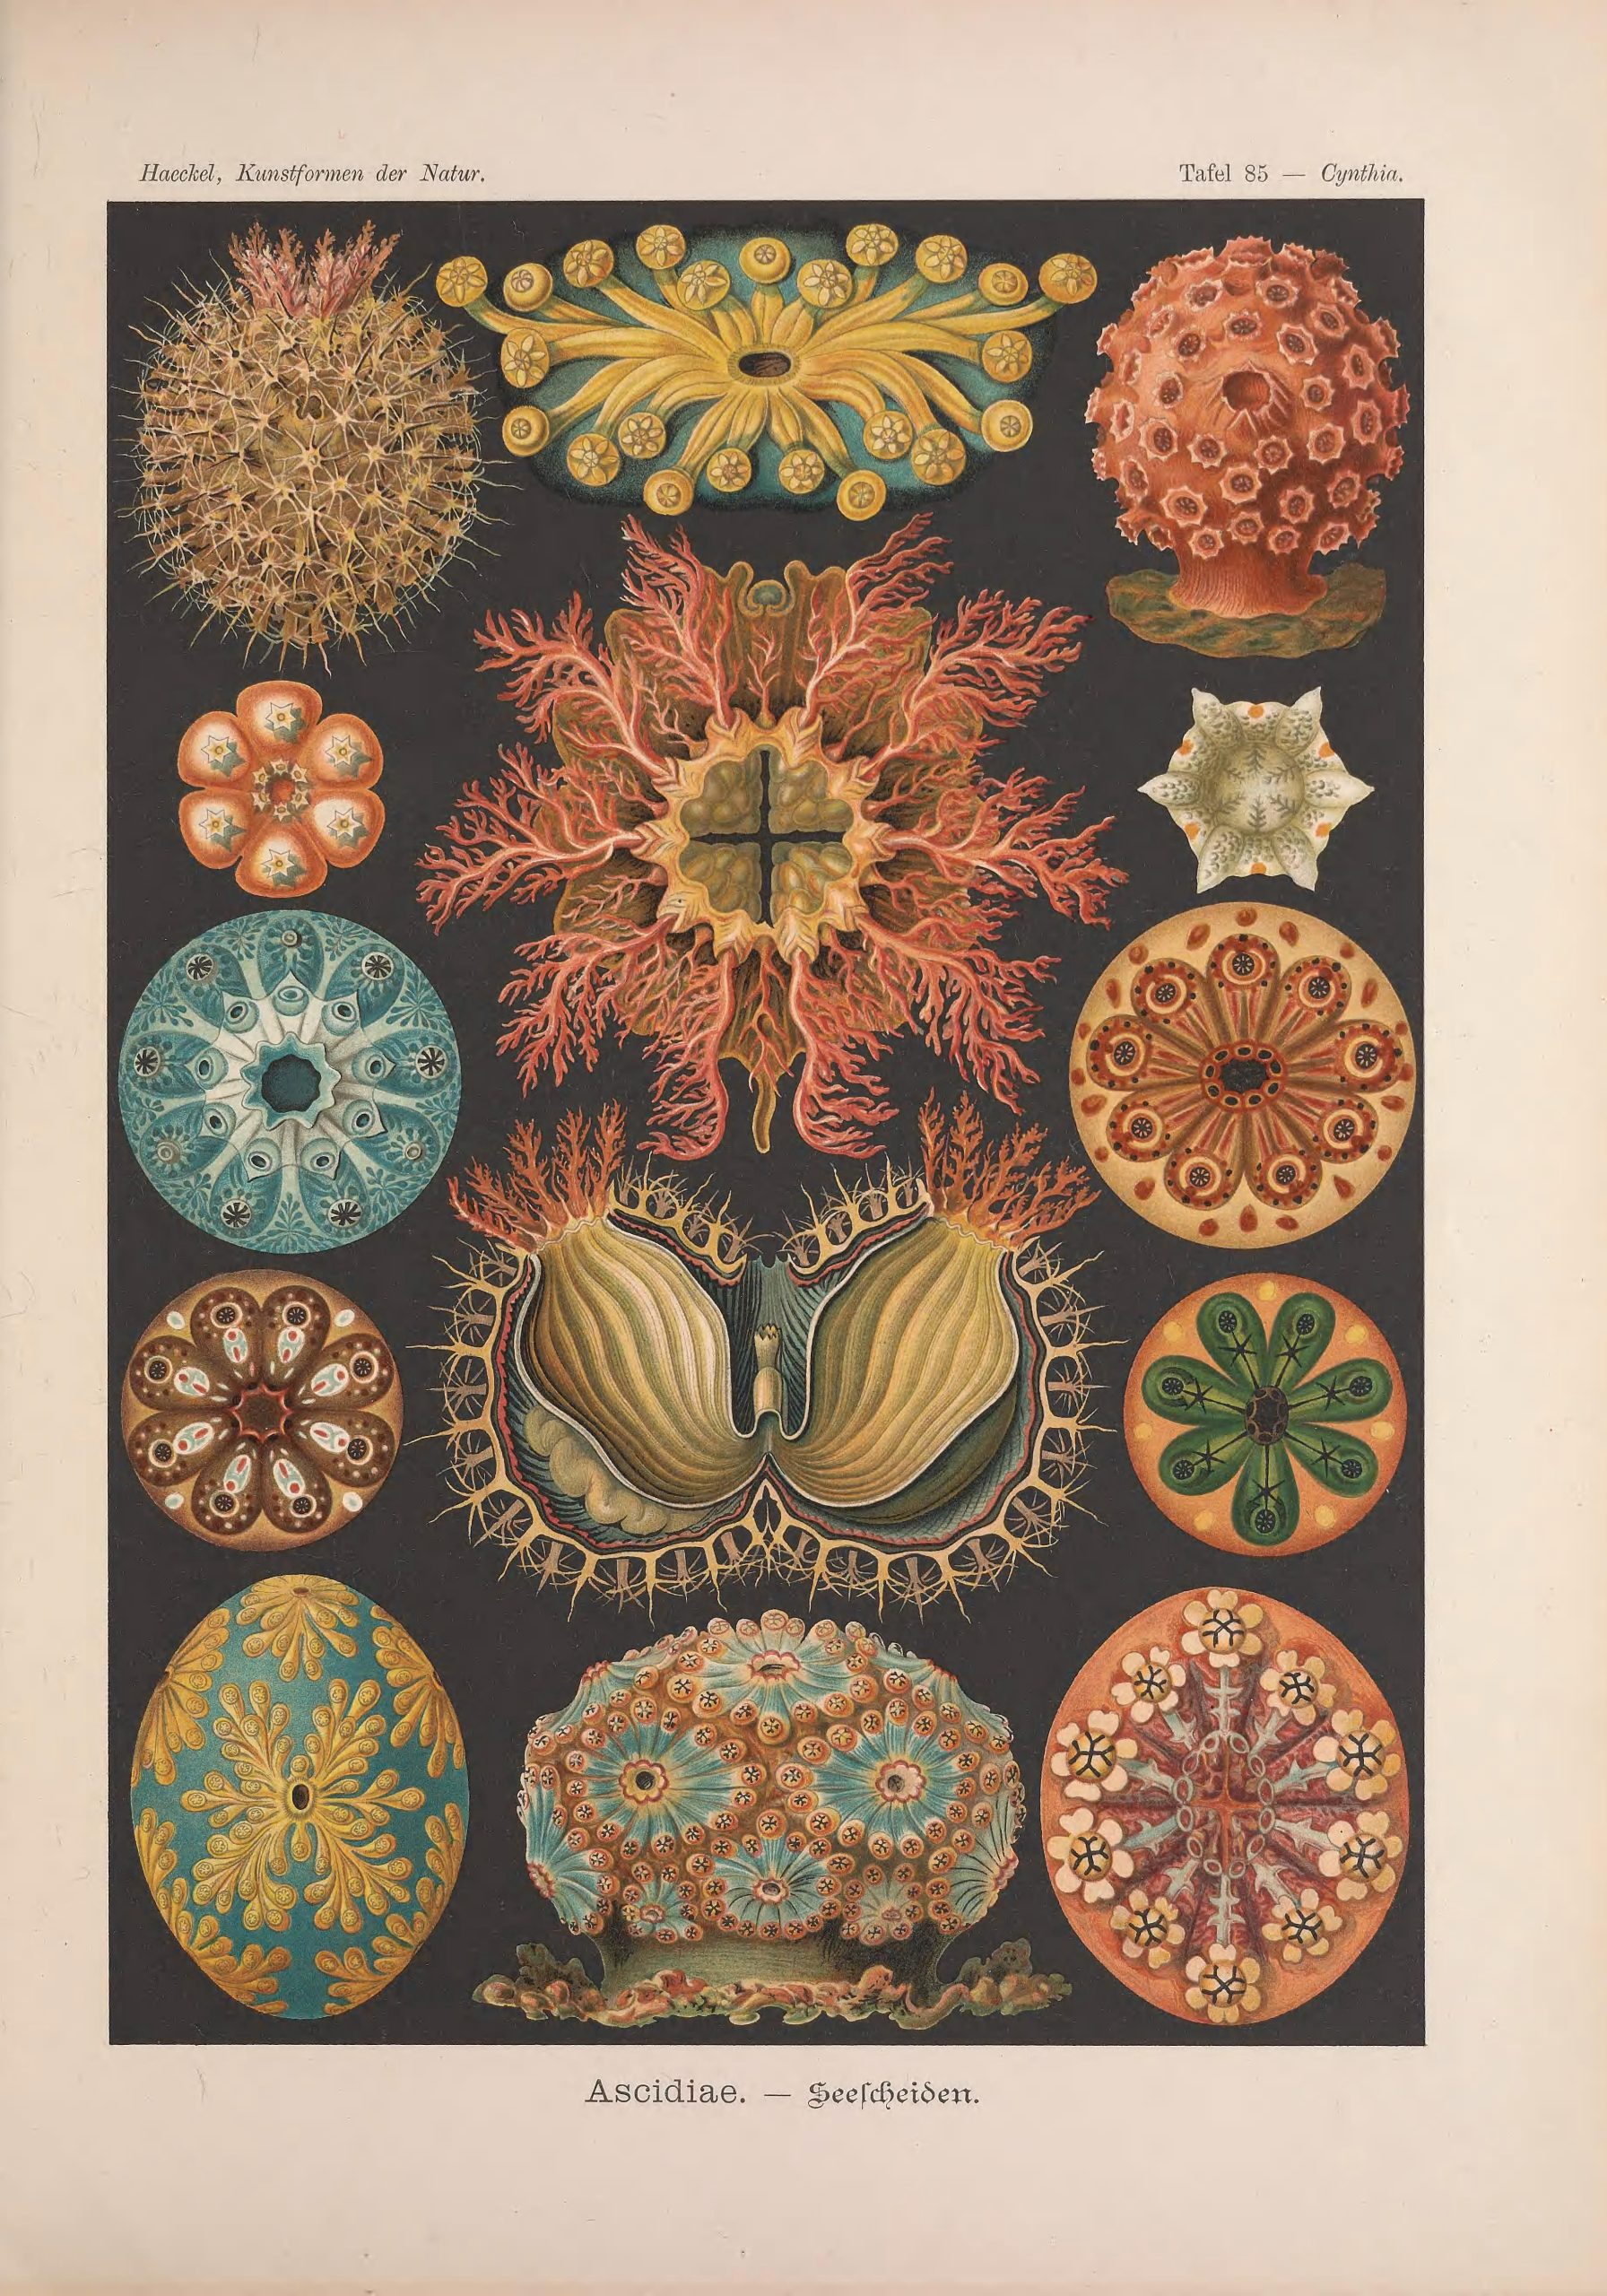 A scientific illustration of various sea squirts